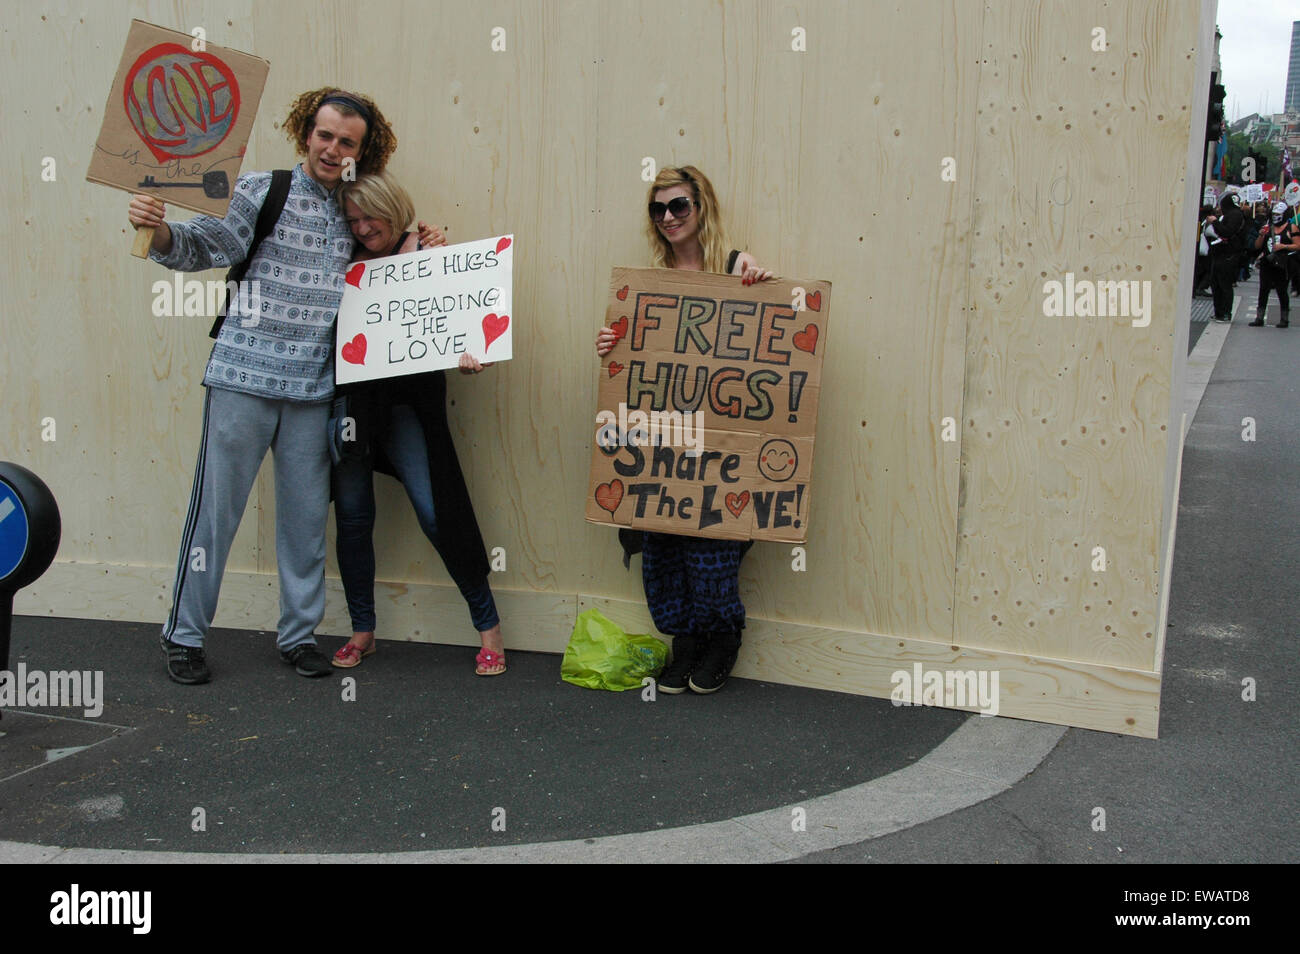 Free hugs on offer during the 'End Austerity Now' demonstration London 20 June 2015 Stock Photo